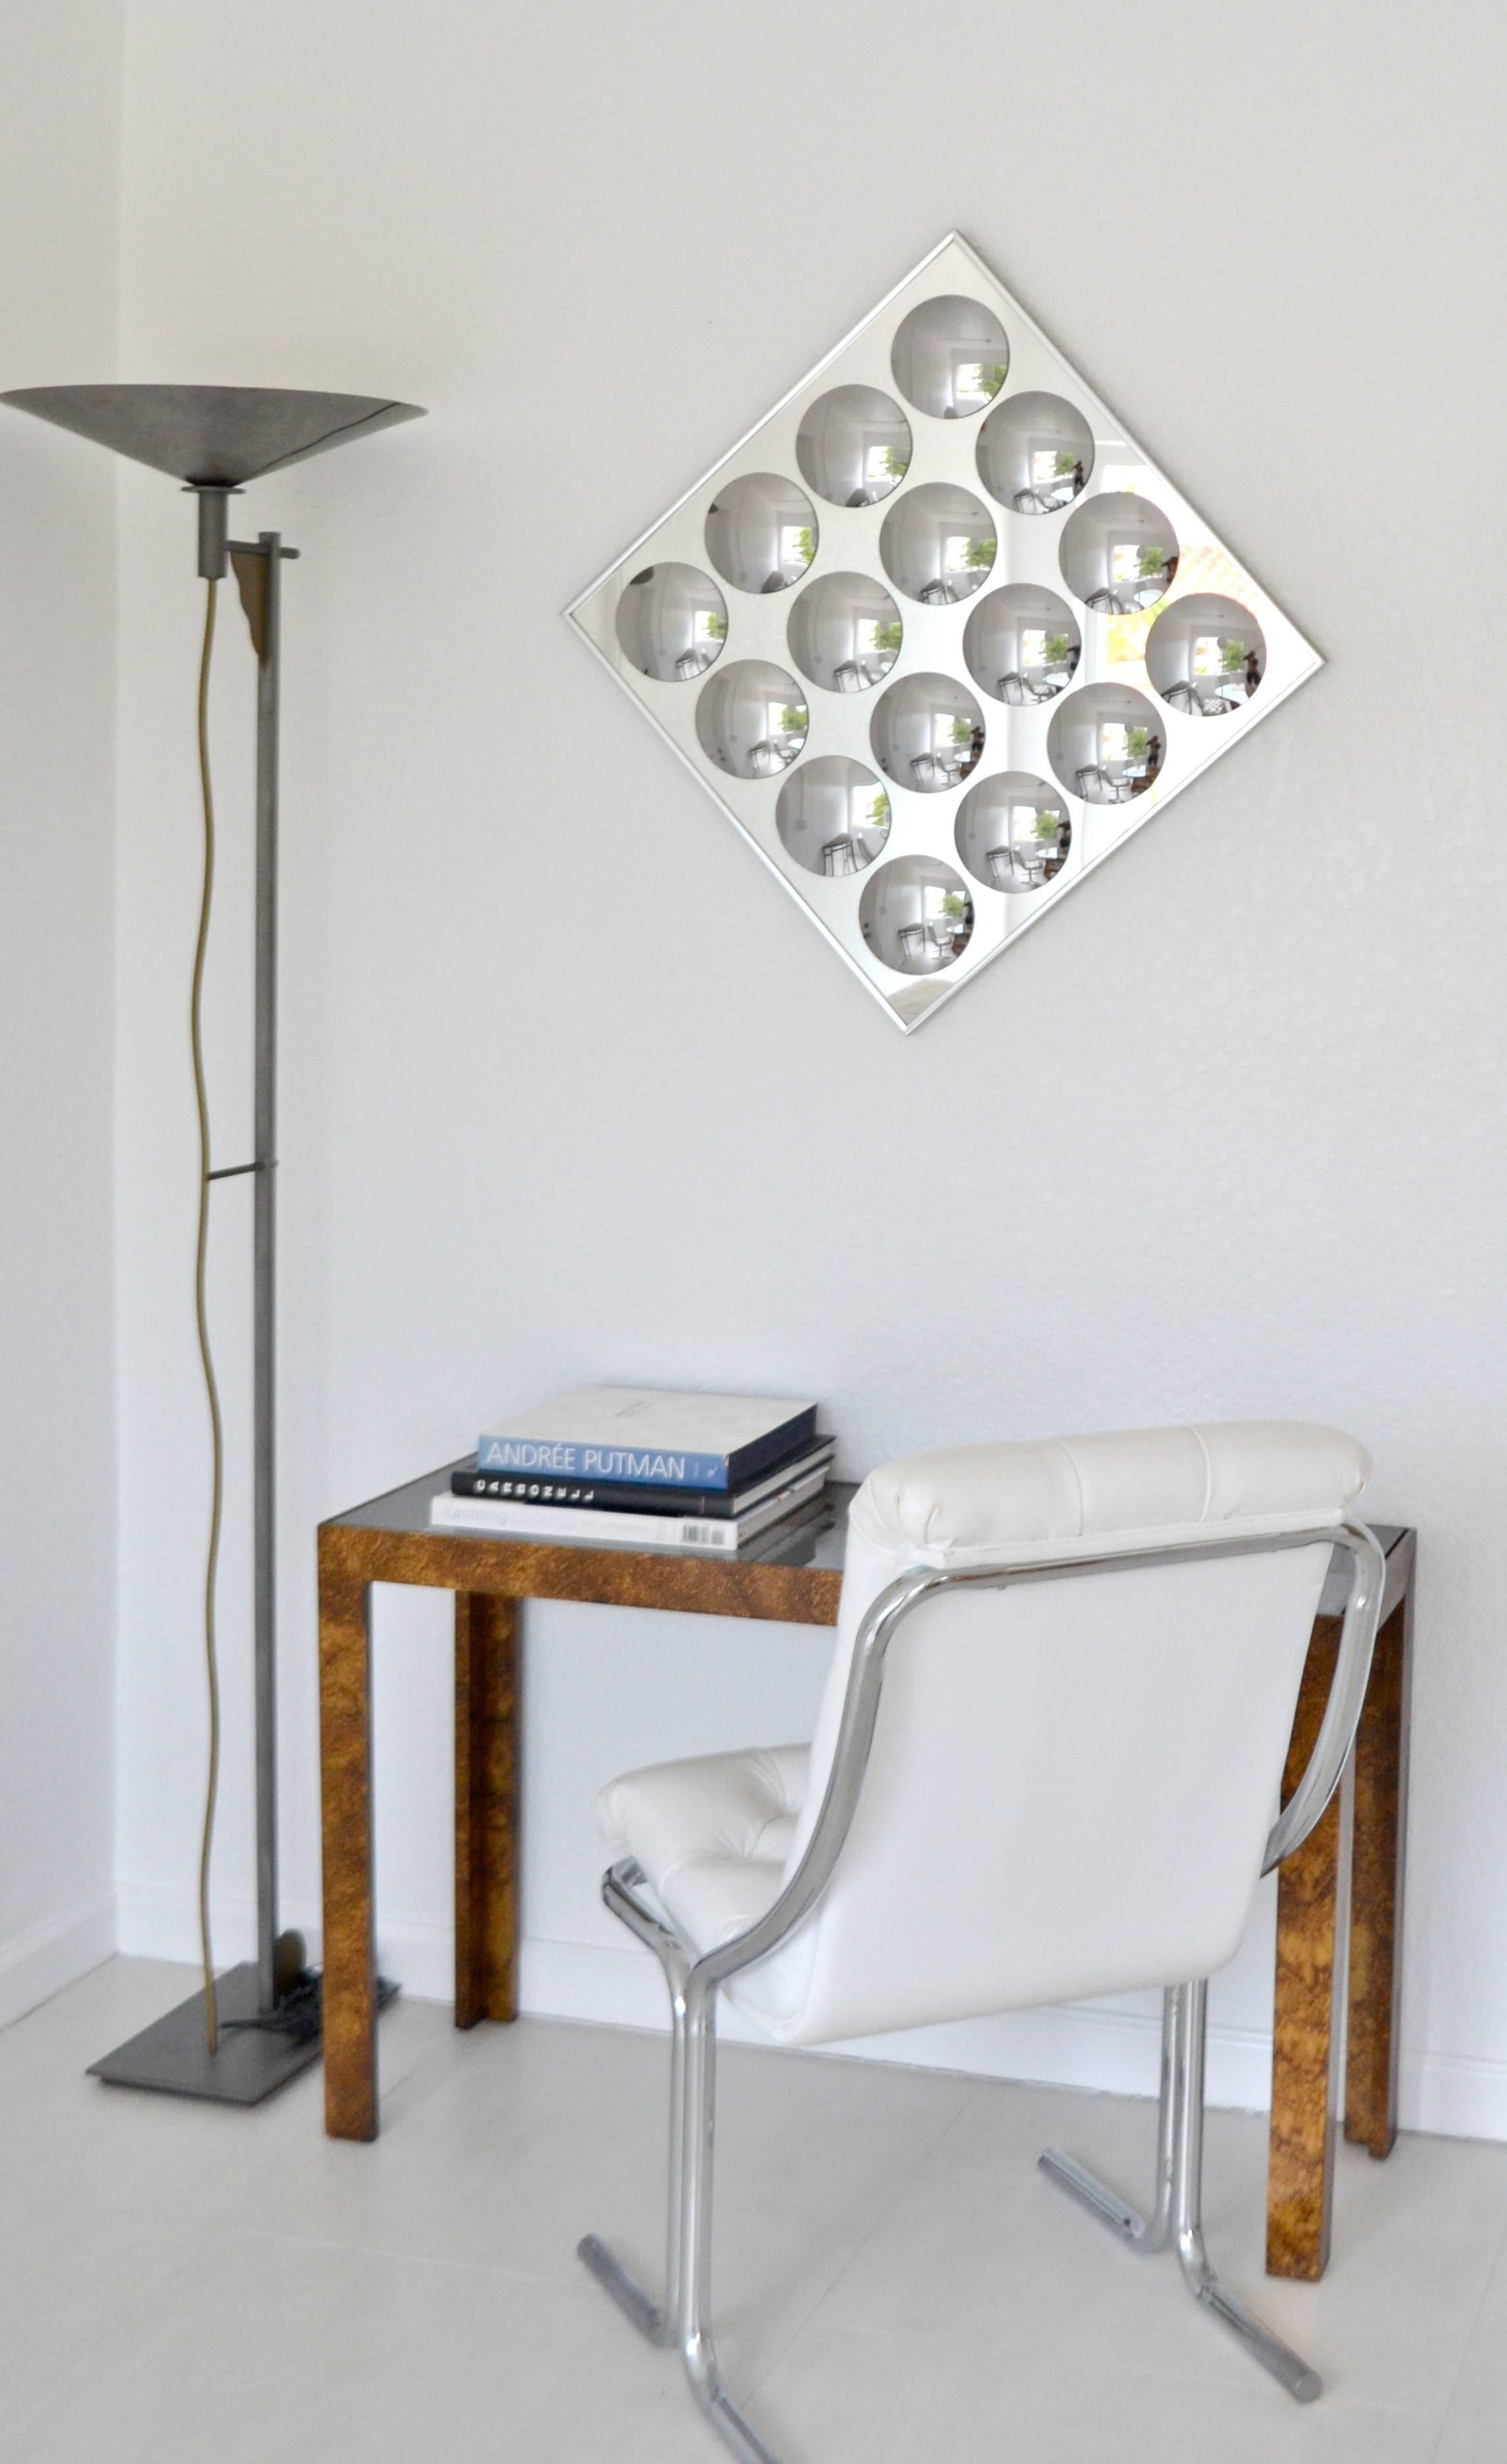 Striking midcentury Op Art wall mirror designed by Hal Bienenfeld, circa 1970s. This incredible artisan crafted mirror is designed of convex mirrors on a square mirror form and mounted in a polished chrome frame. Designed to be hung on a diagonal or